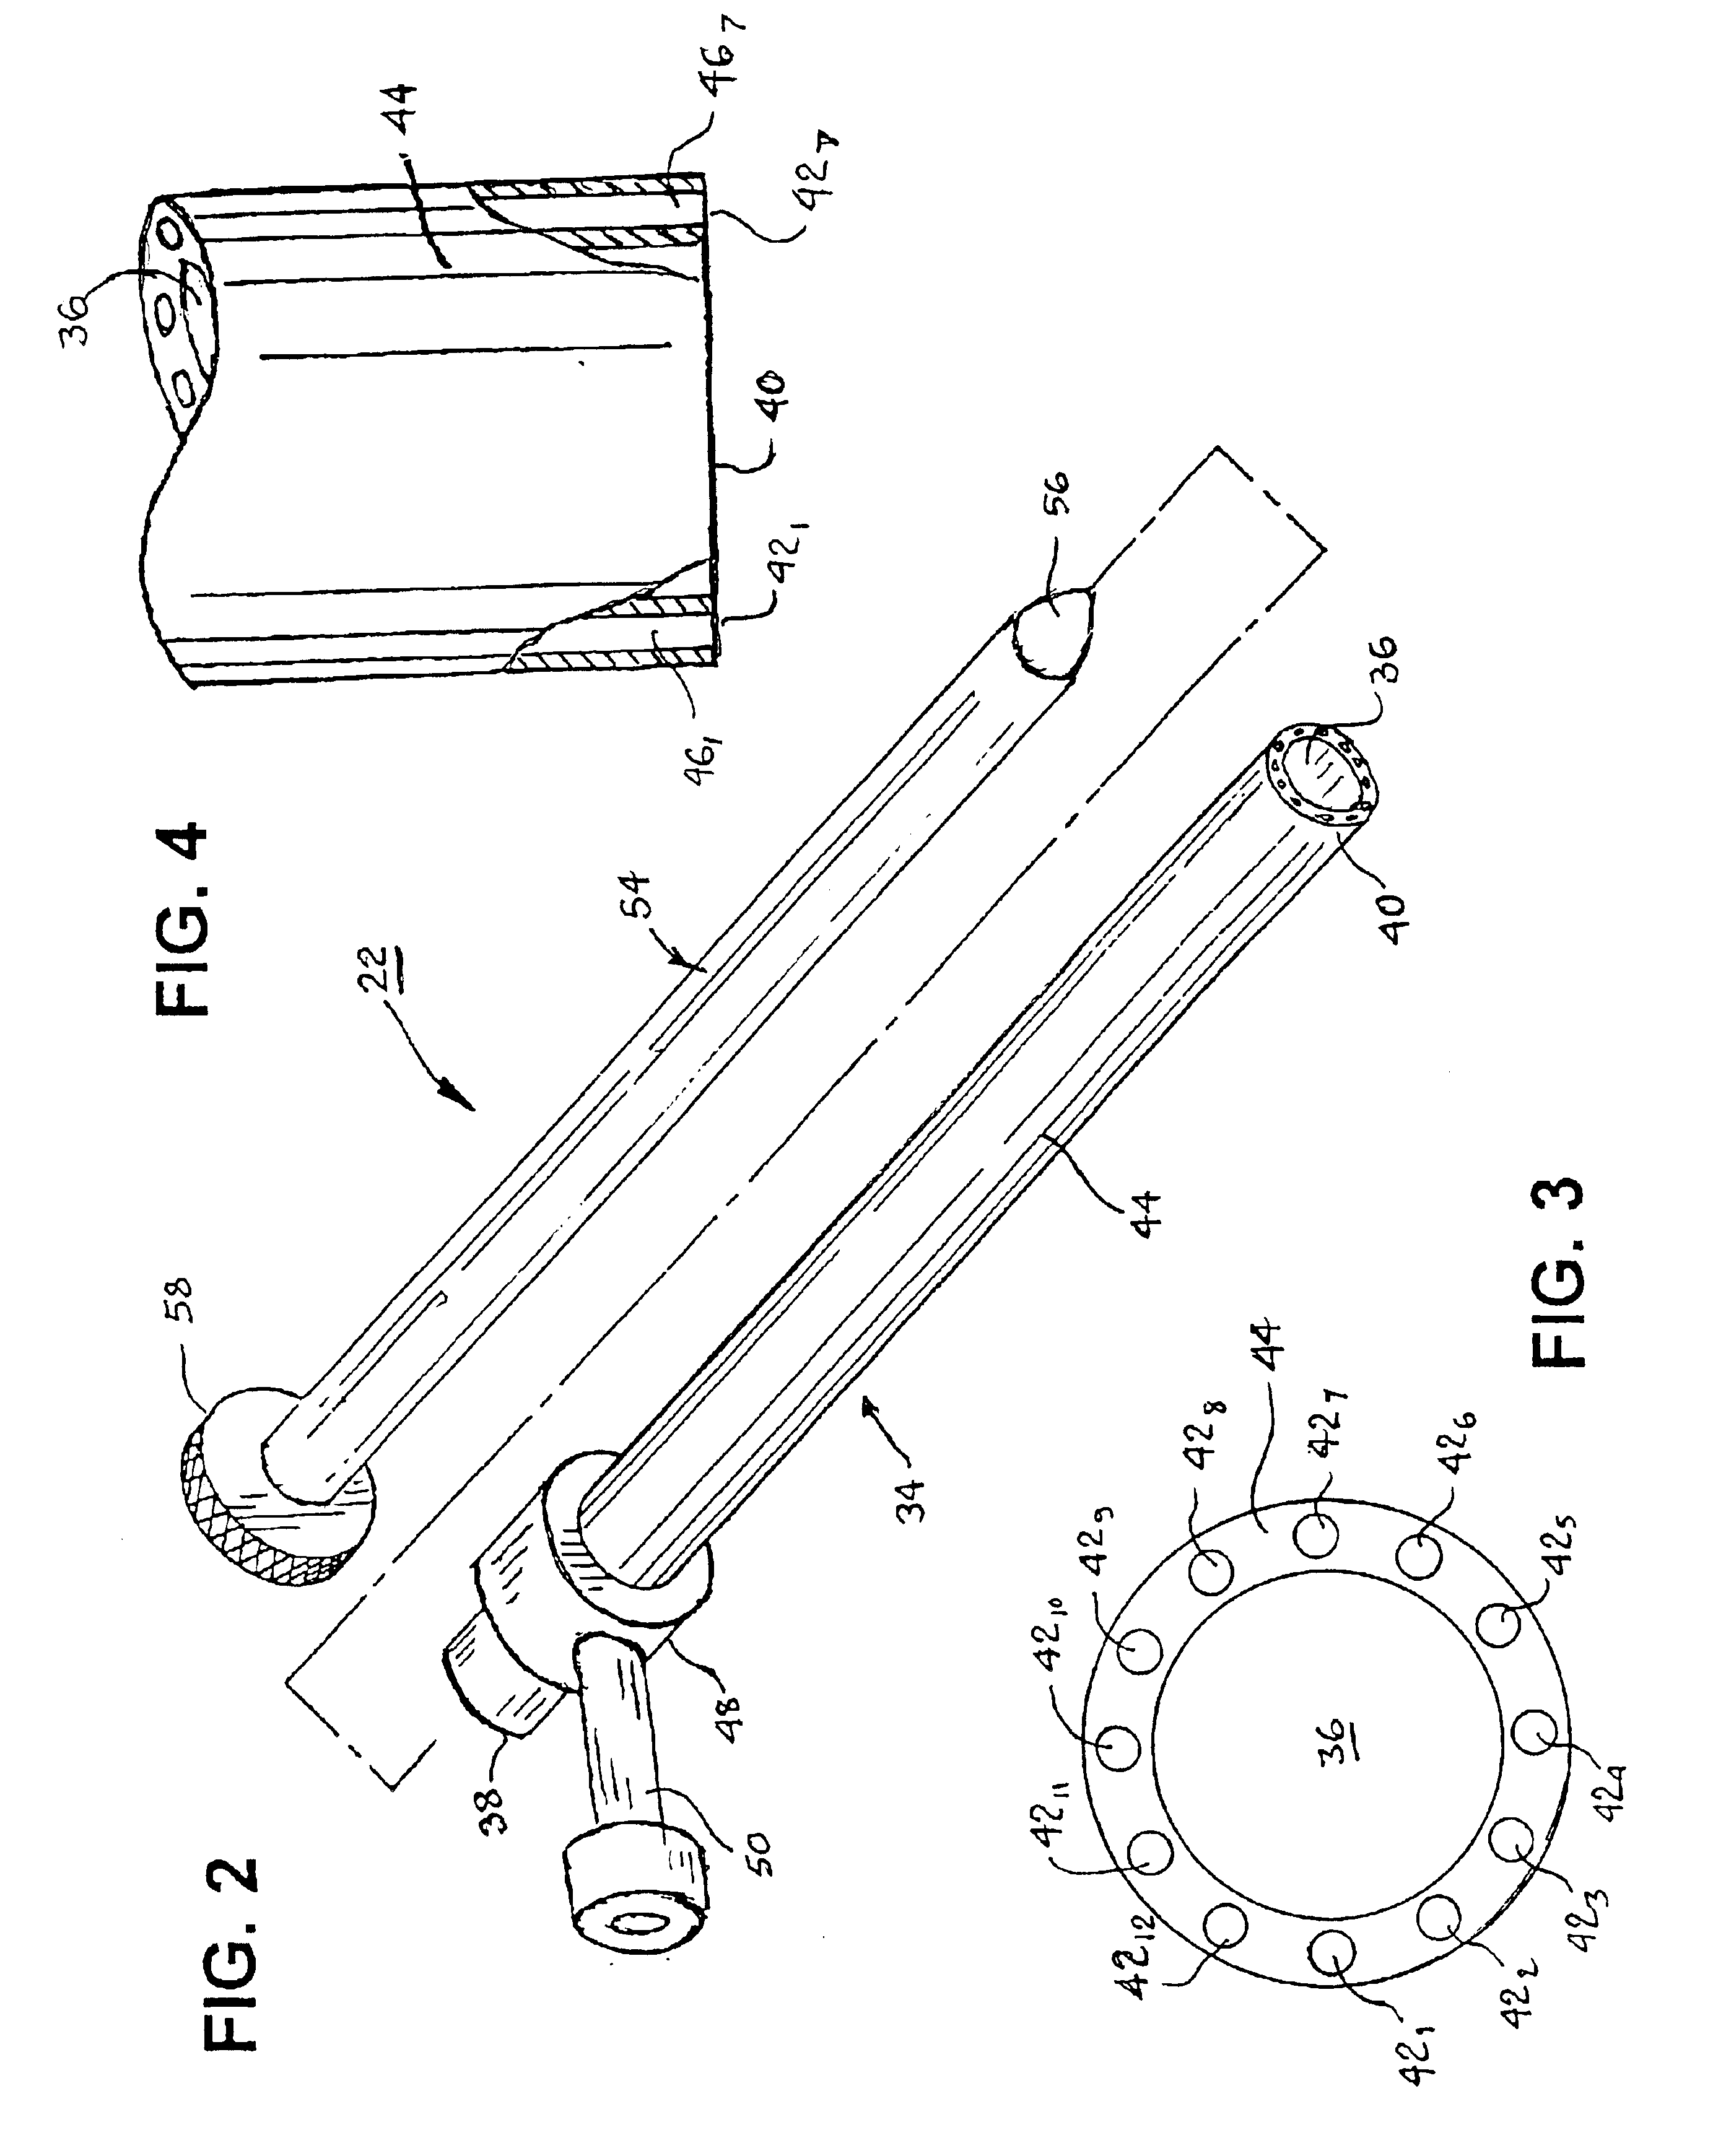 Anatomical space access tools and methods